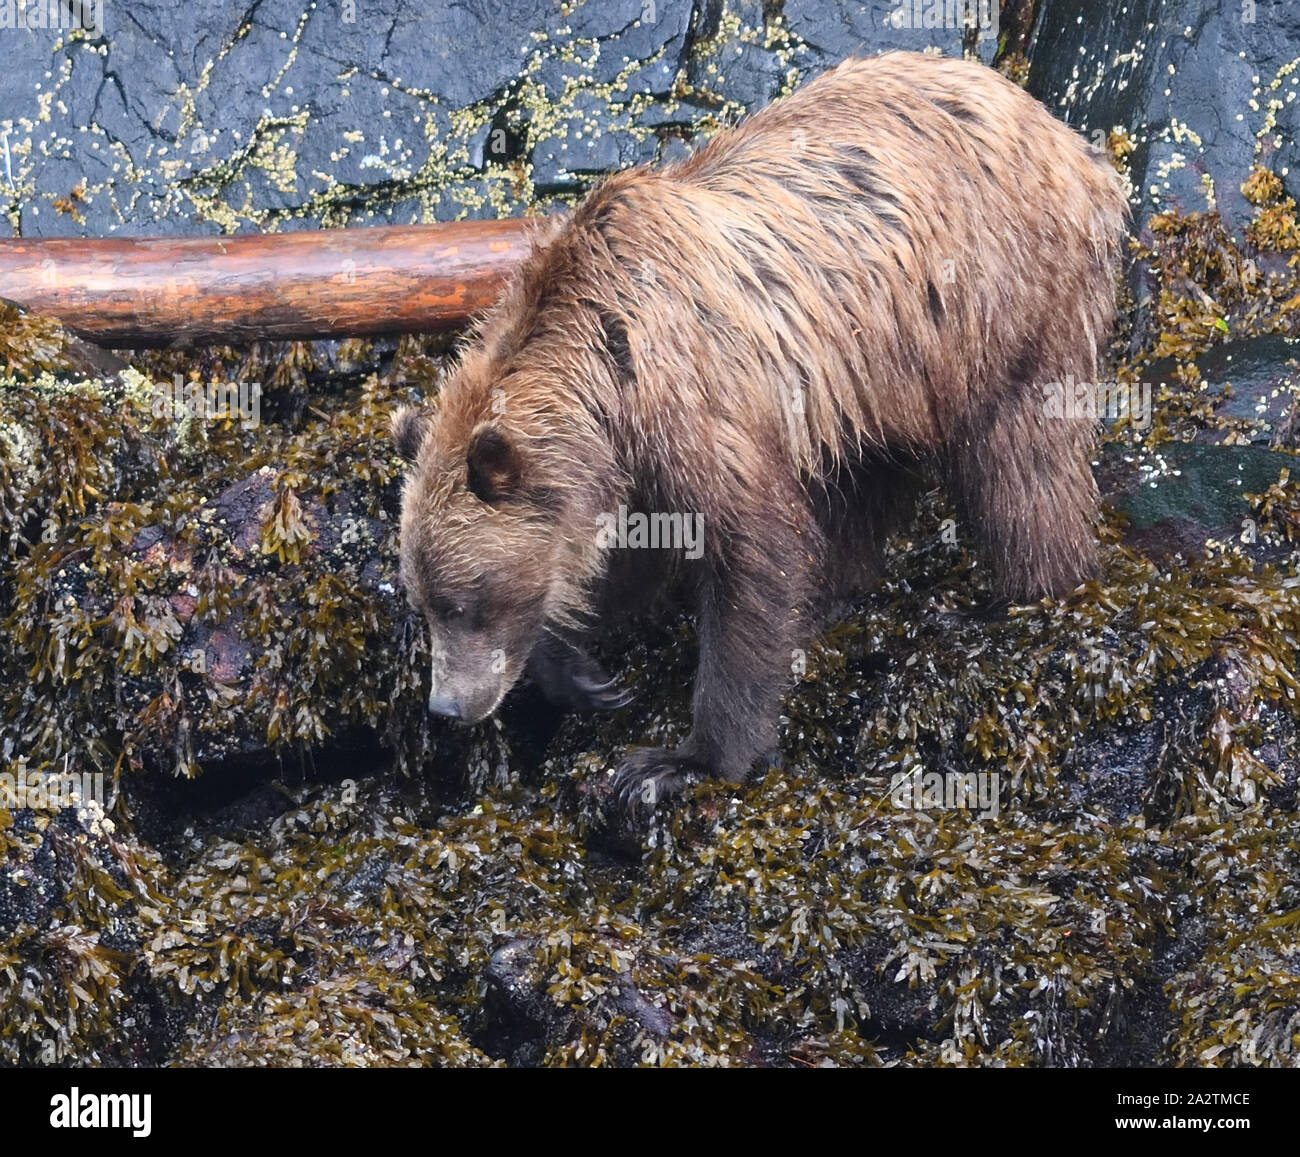 A grizzly bear (Ursus arctos) hunts for food on a rocky shore at low tide. It uses its long claws to dig and turn over rocks and its teeth to scrape s Stock Photo